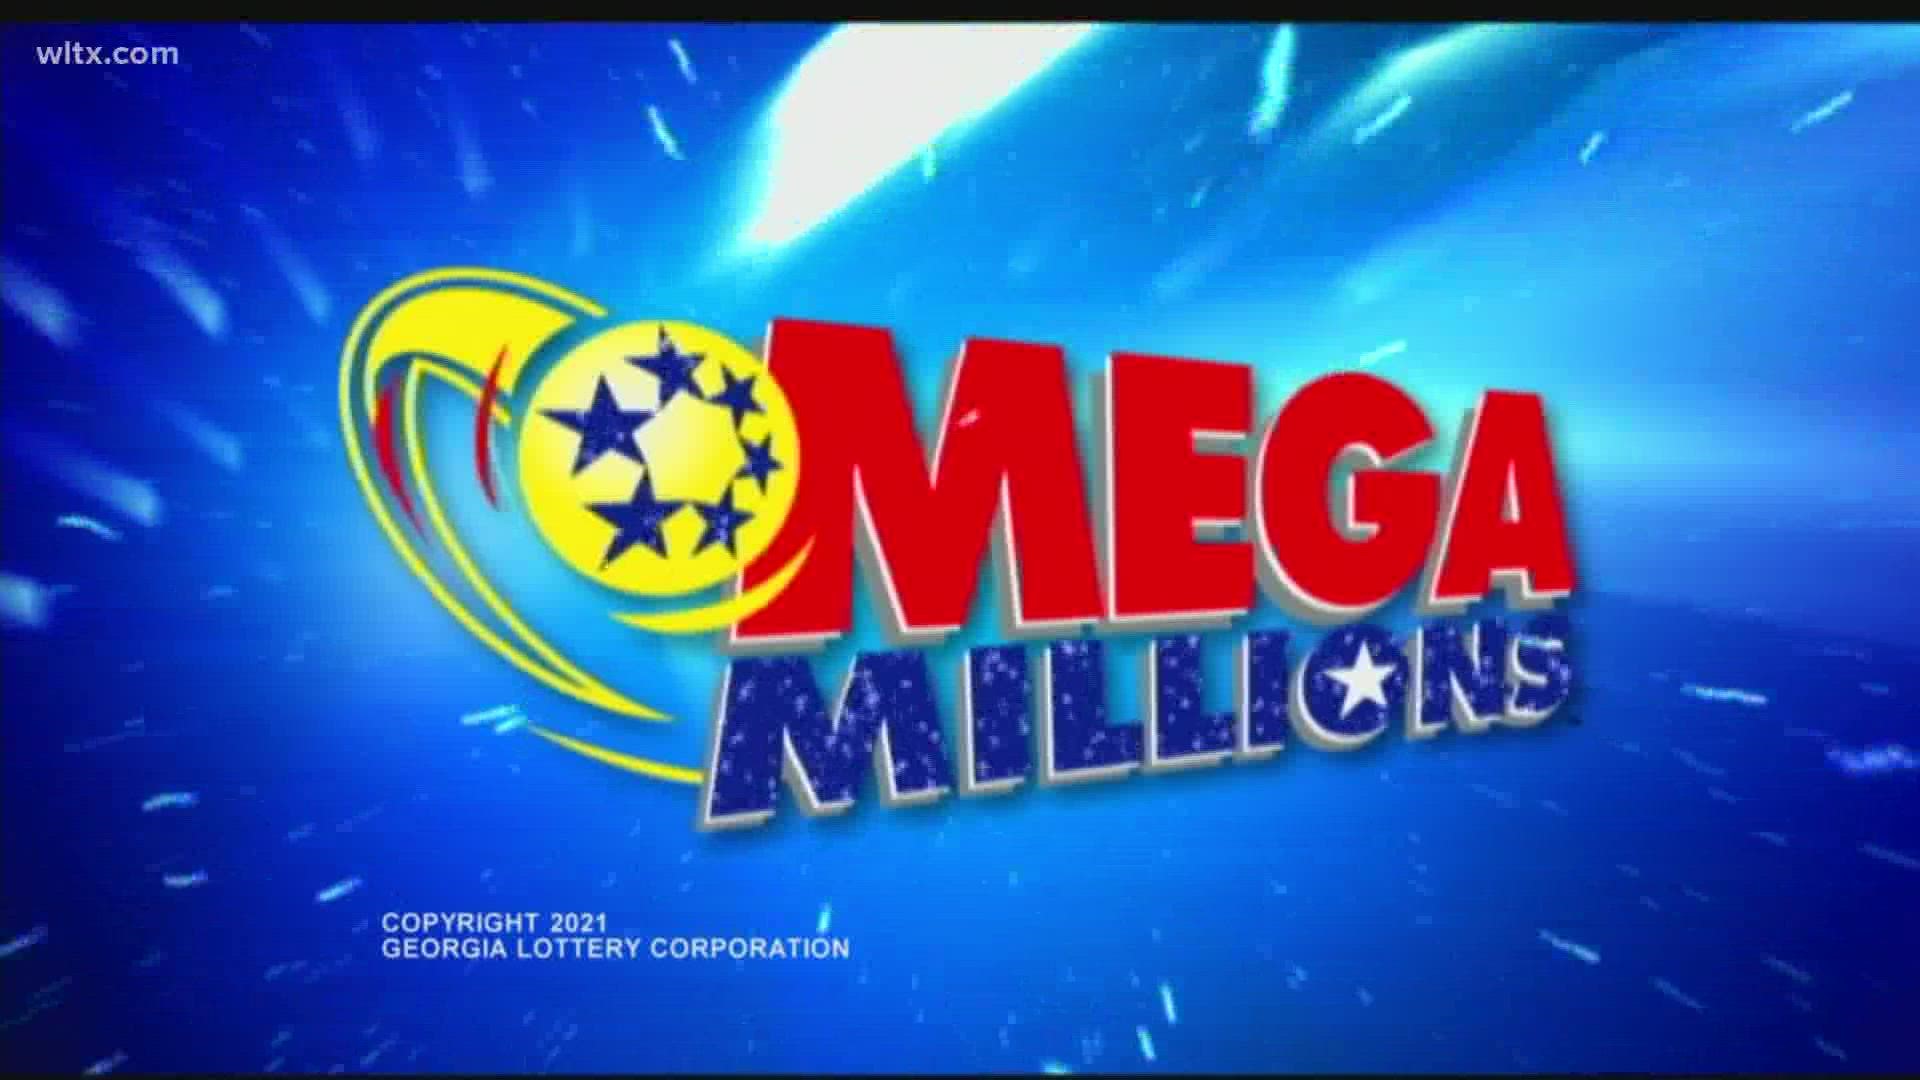 Here are the winning Mega Millions numbers for October 8, 2021.